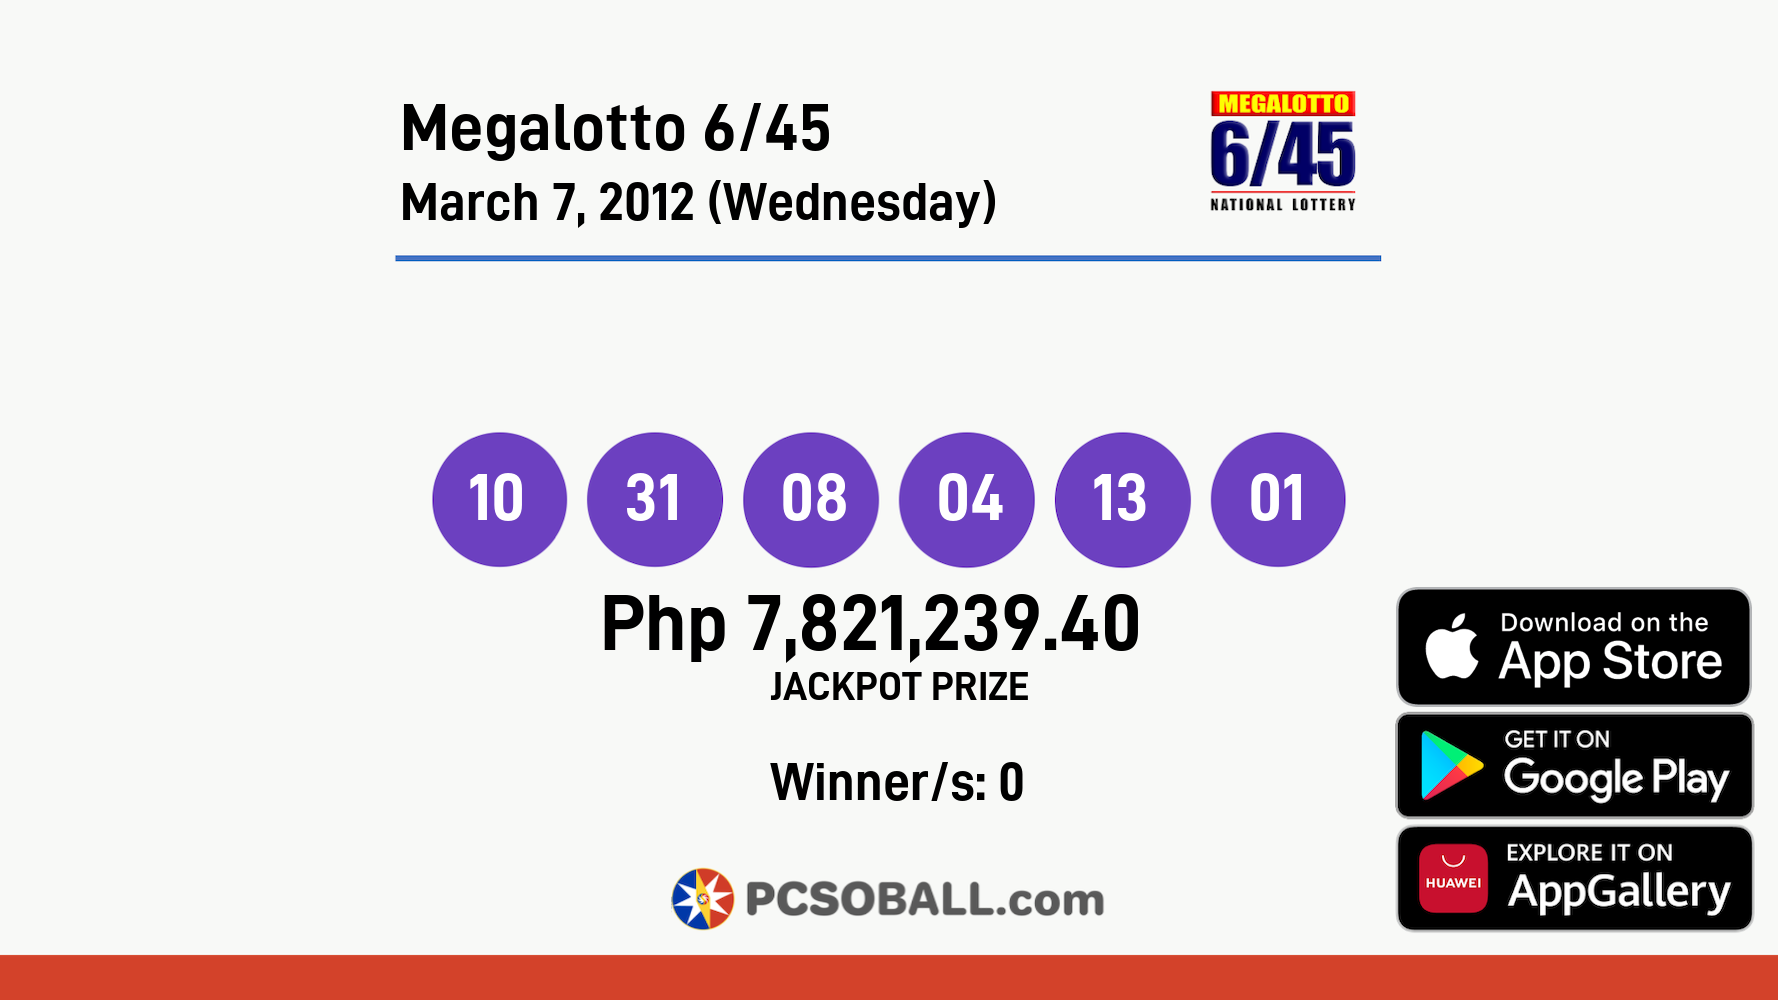 Megalotto 6/45 March 7, 2012 (Wednesday) Result